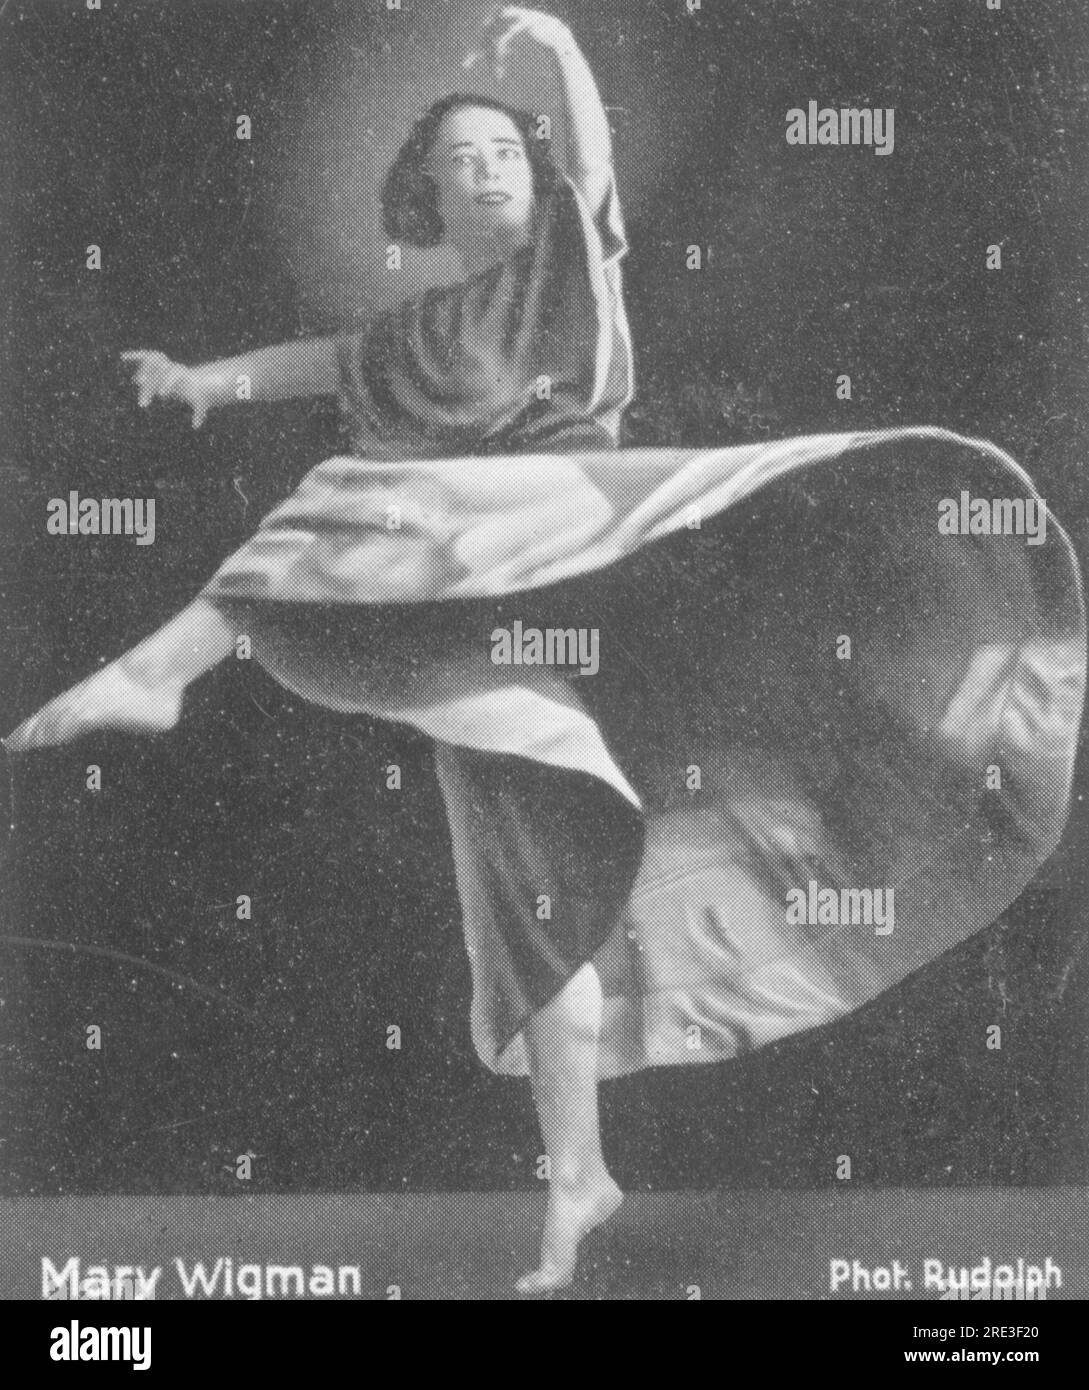 Wigman, Maria, 13.11.1886 - 19.9.1973, German dancer and choreographer, dance gypsy tunes, ADDITIONAL-RIGHTS-CLEARANCE-INFO-NOT-AVAILABLE Stock Photo